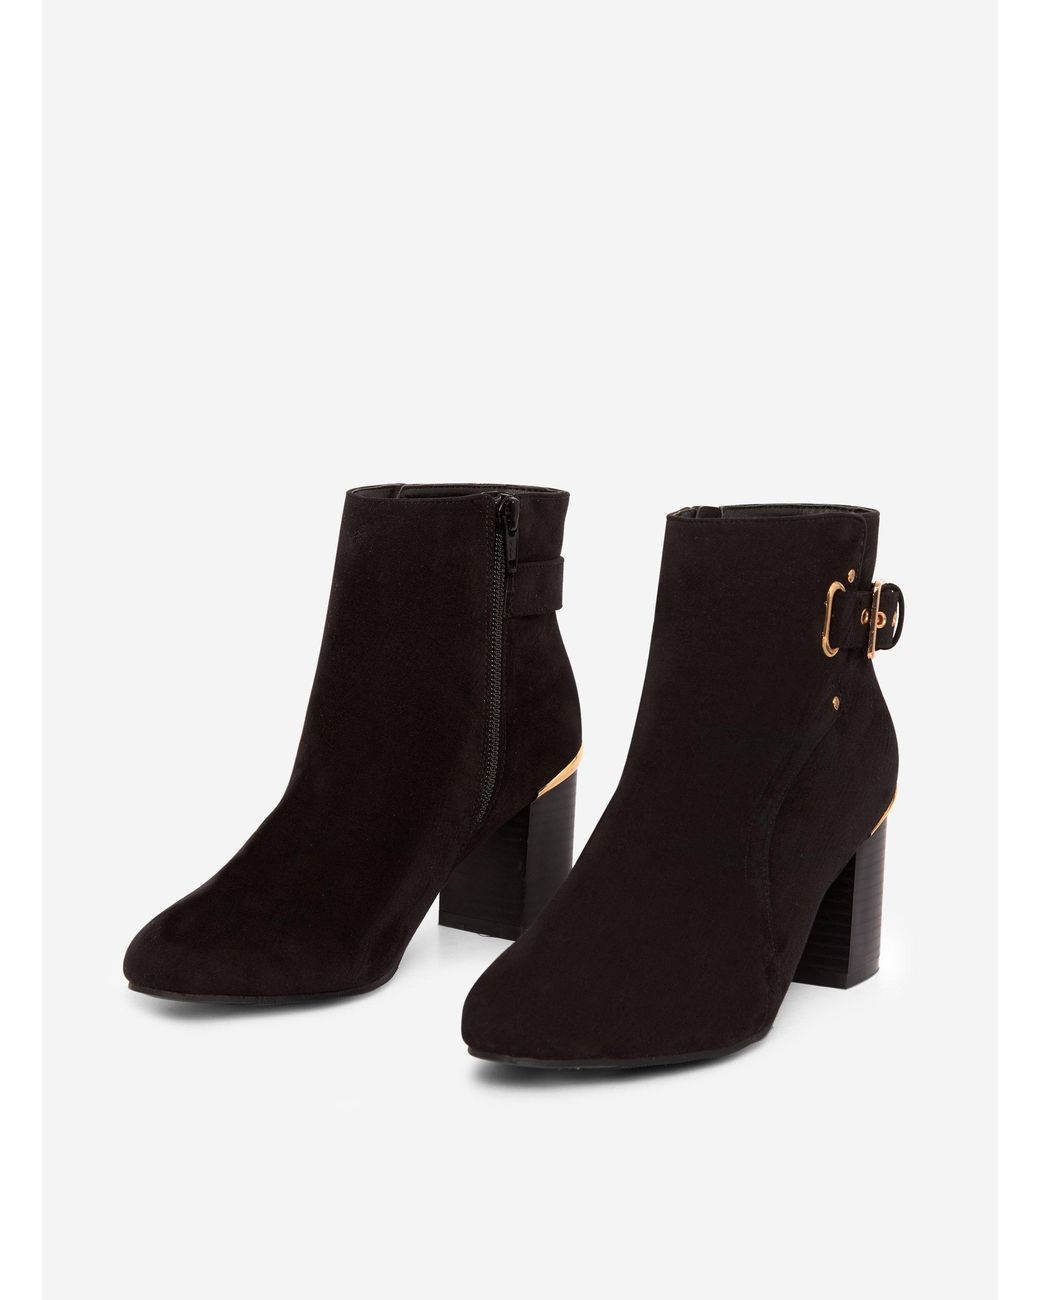 dorothy perkins black suede ankle boots 